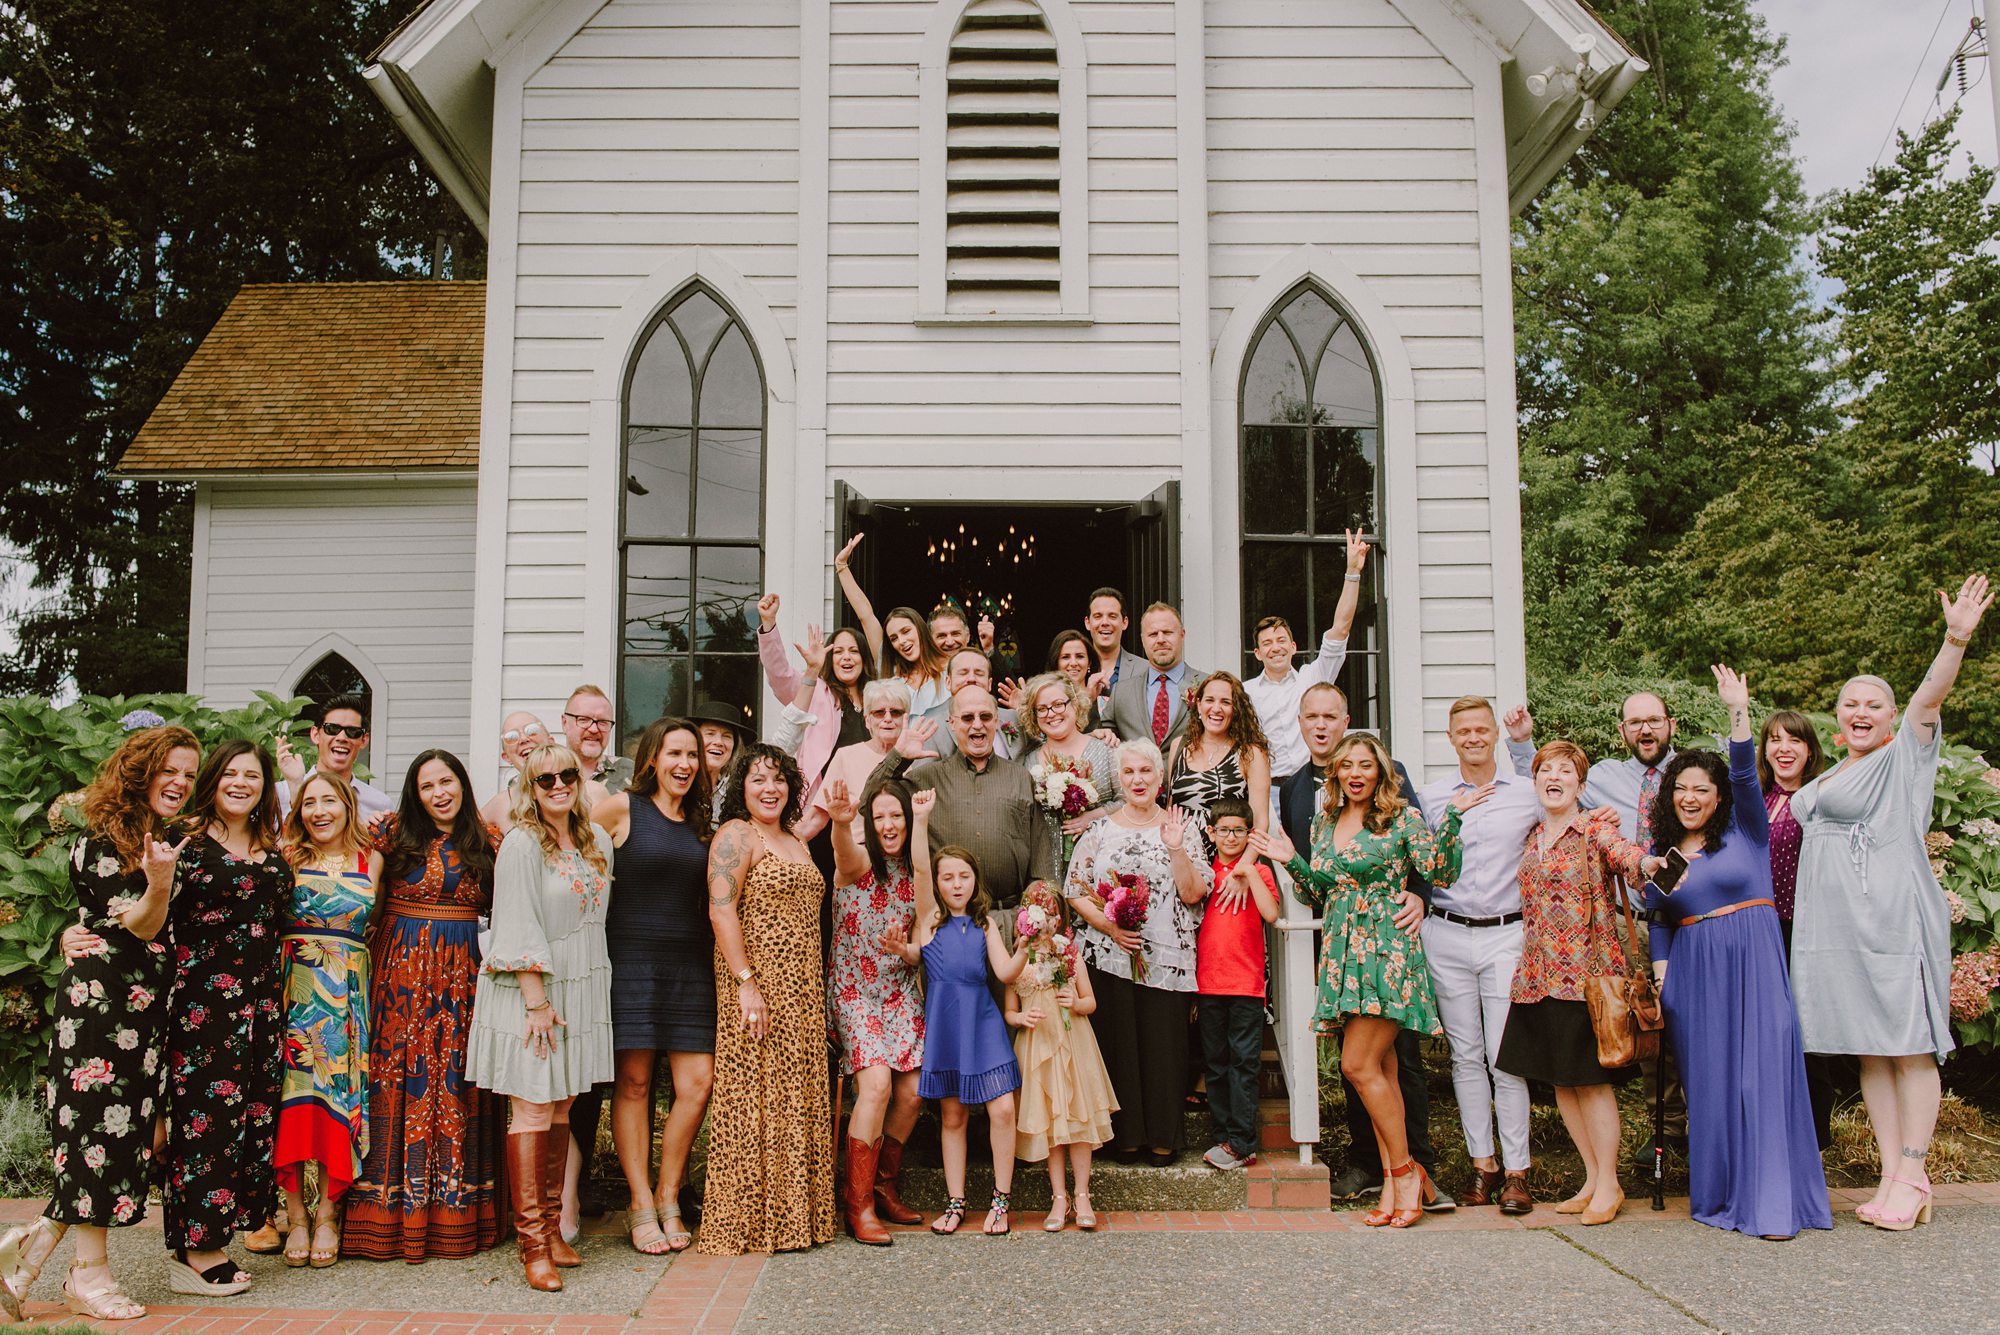 Wedding party photo at Oaks Pioneer Church in Portland, OR